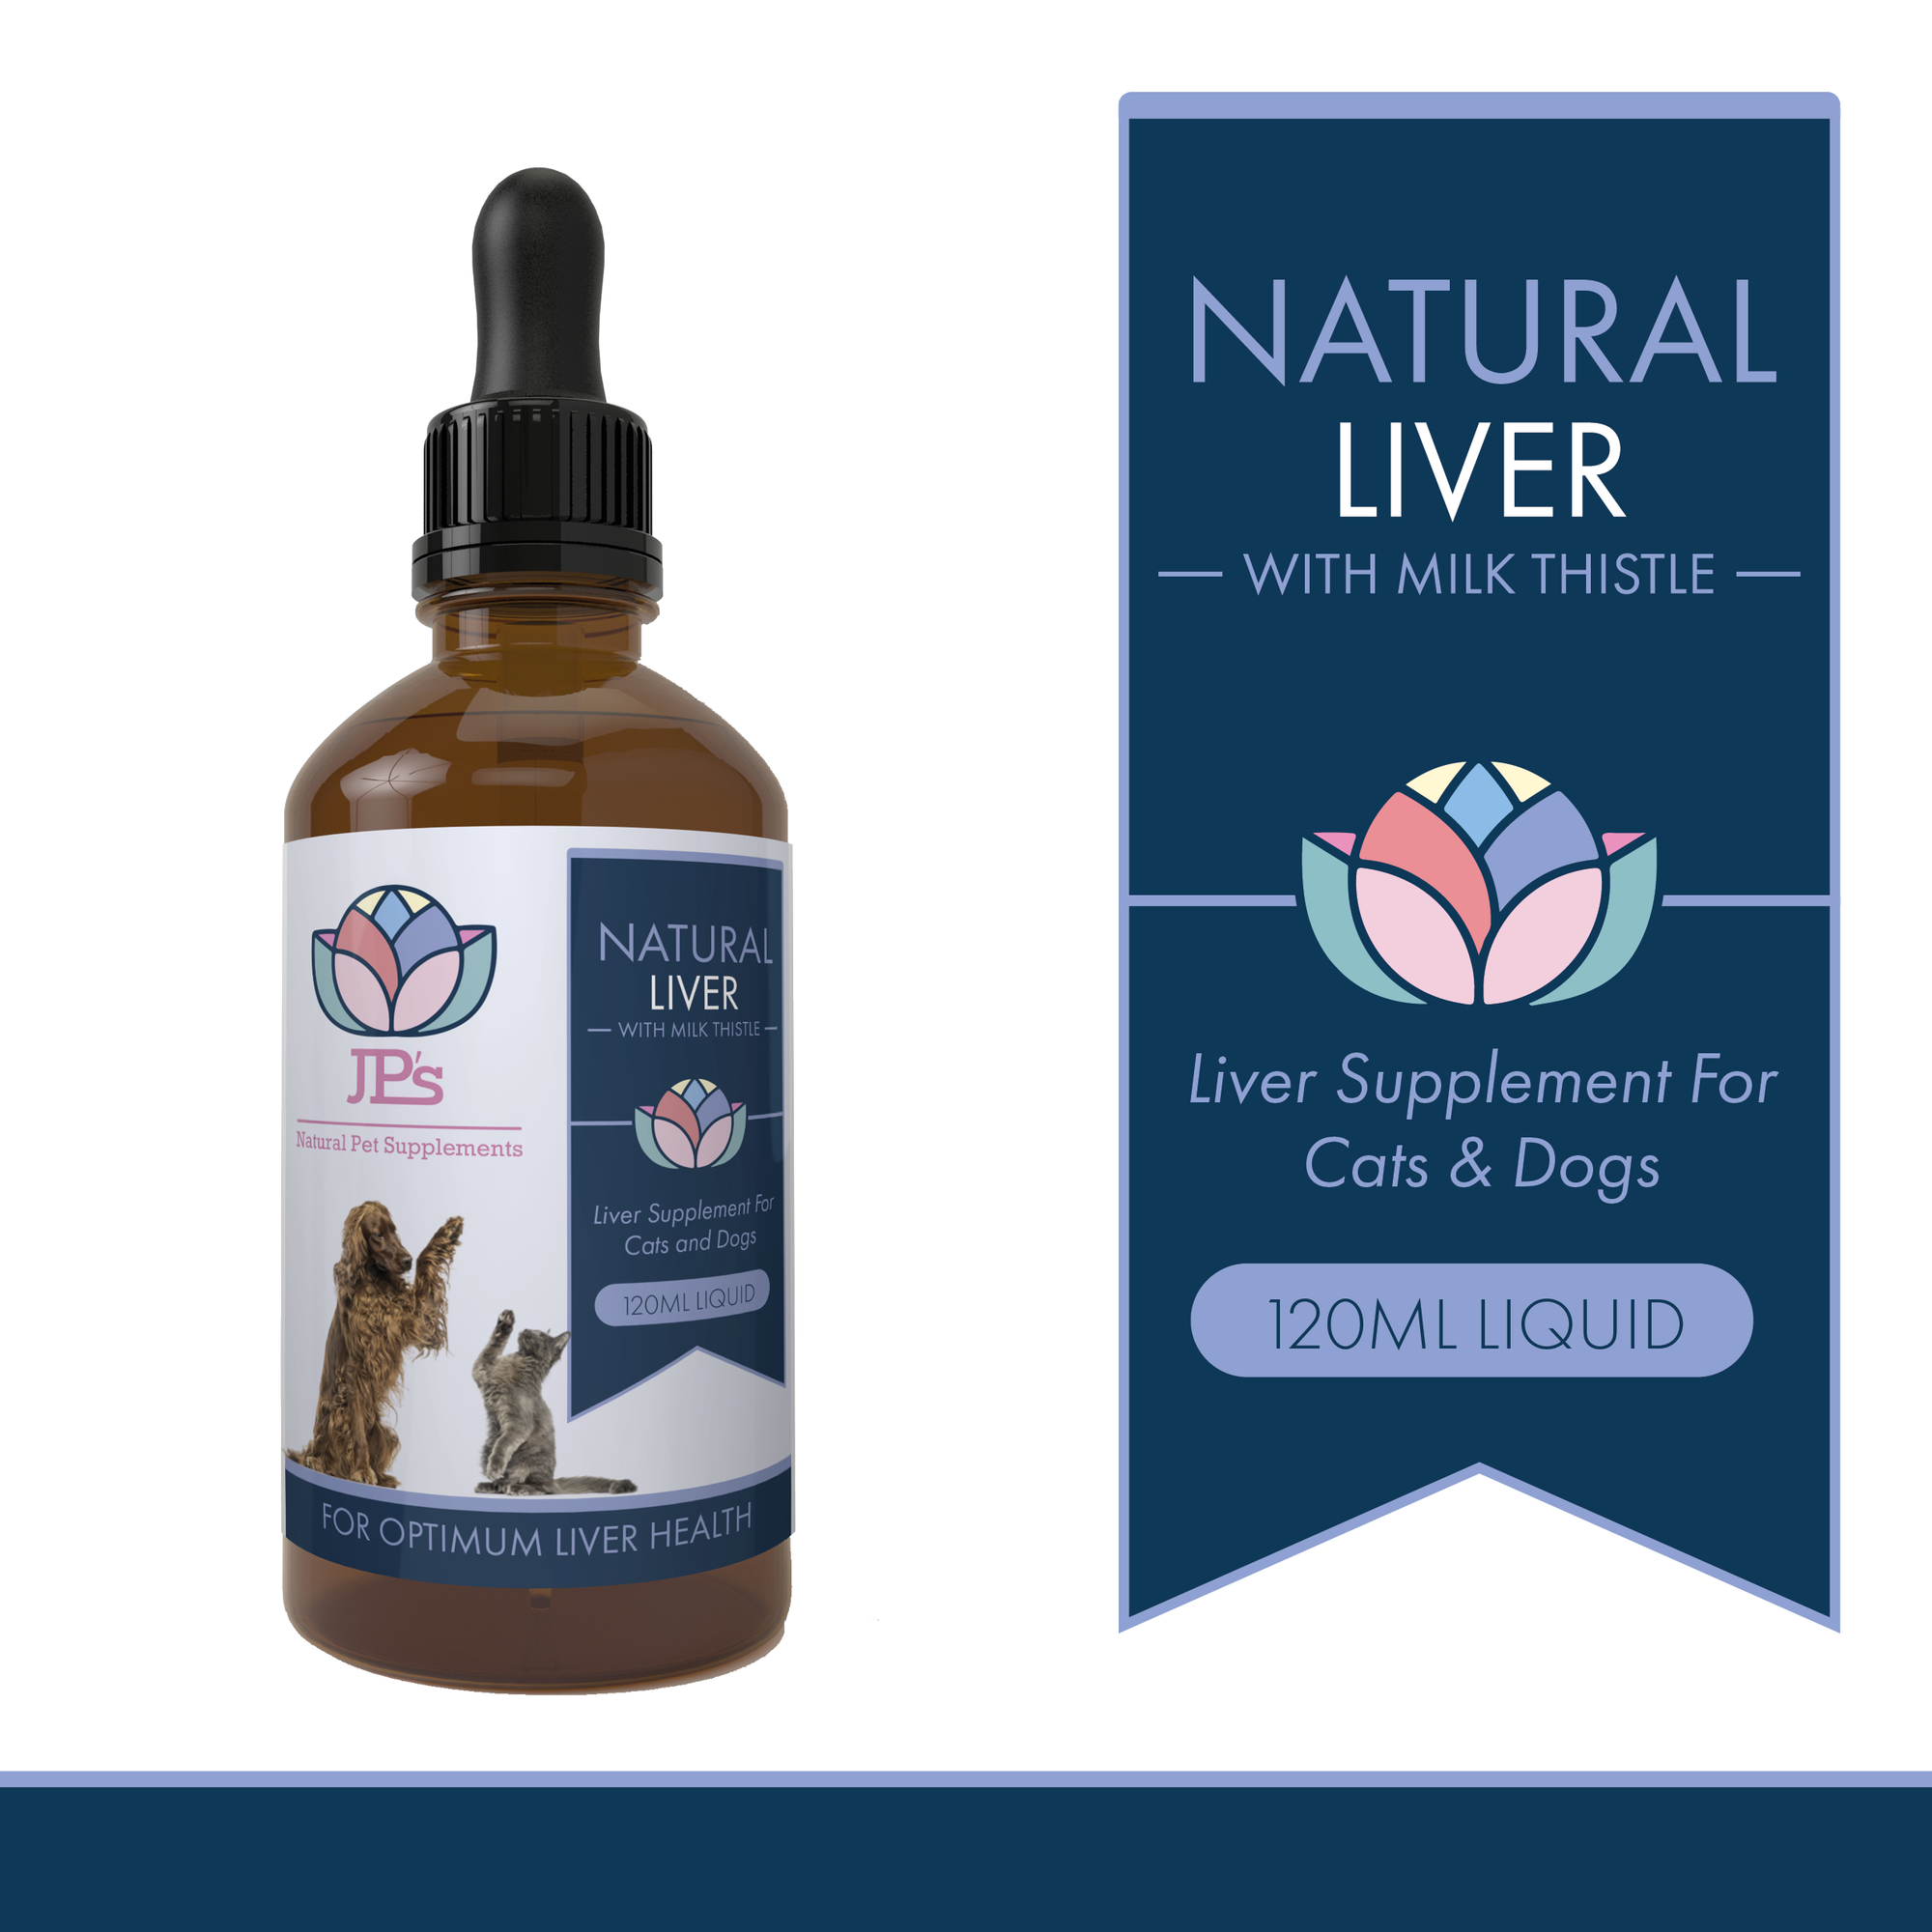 Liquid Liver Supplement with Milk Thistle for Cats & Dogs